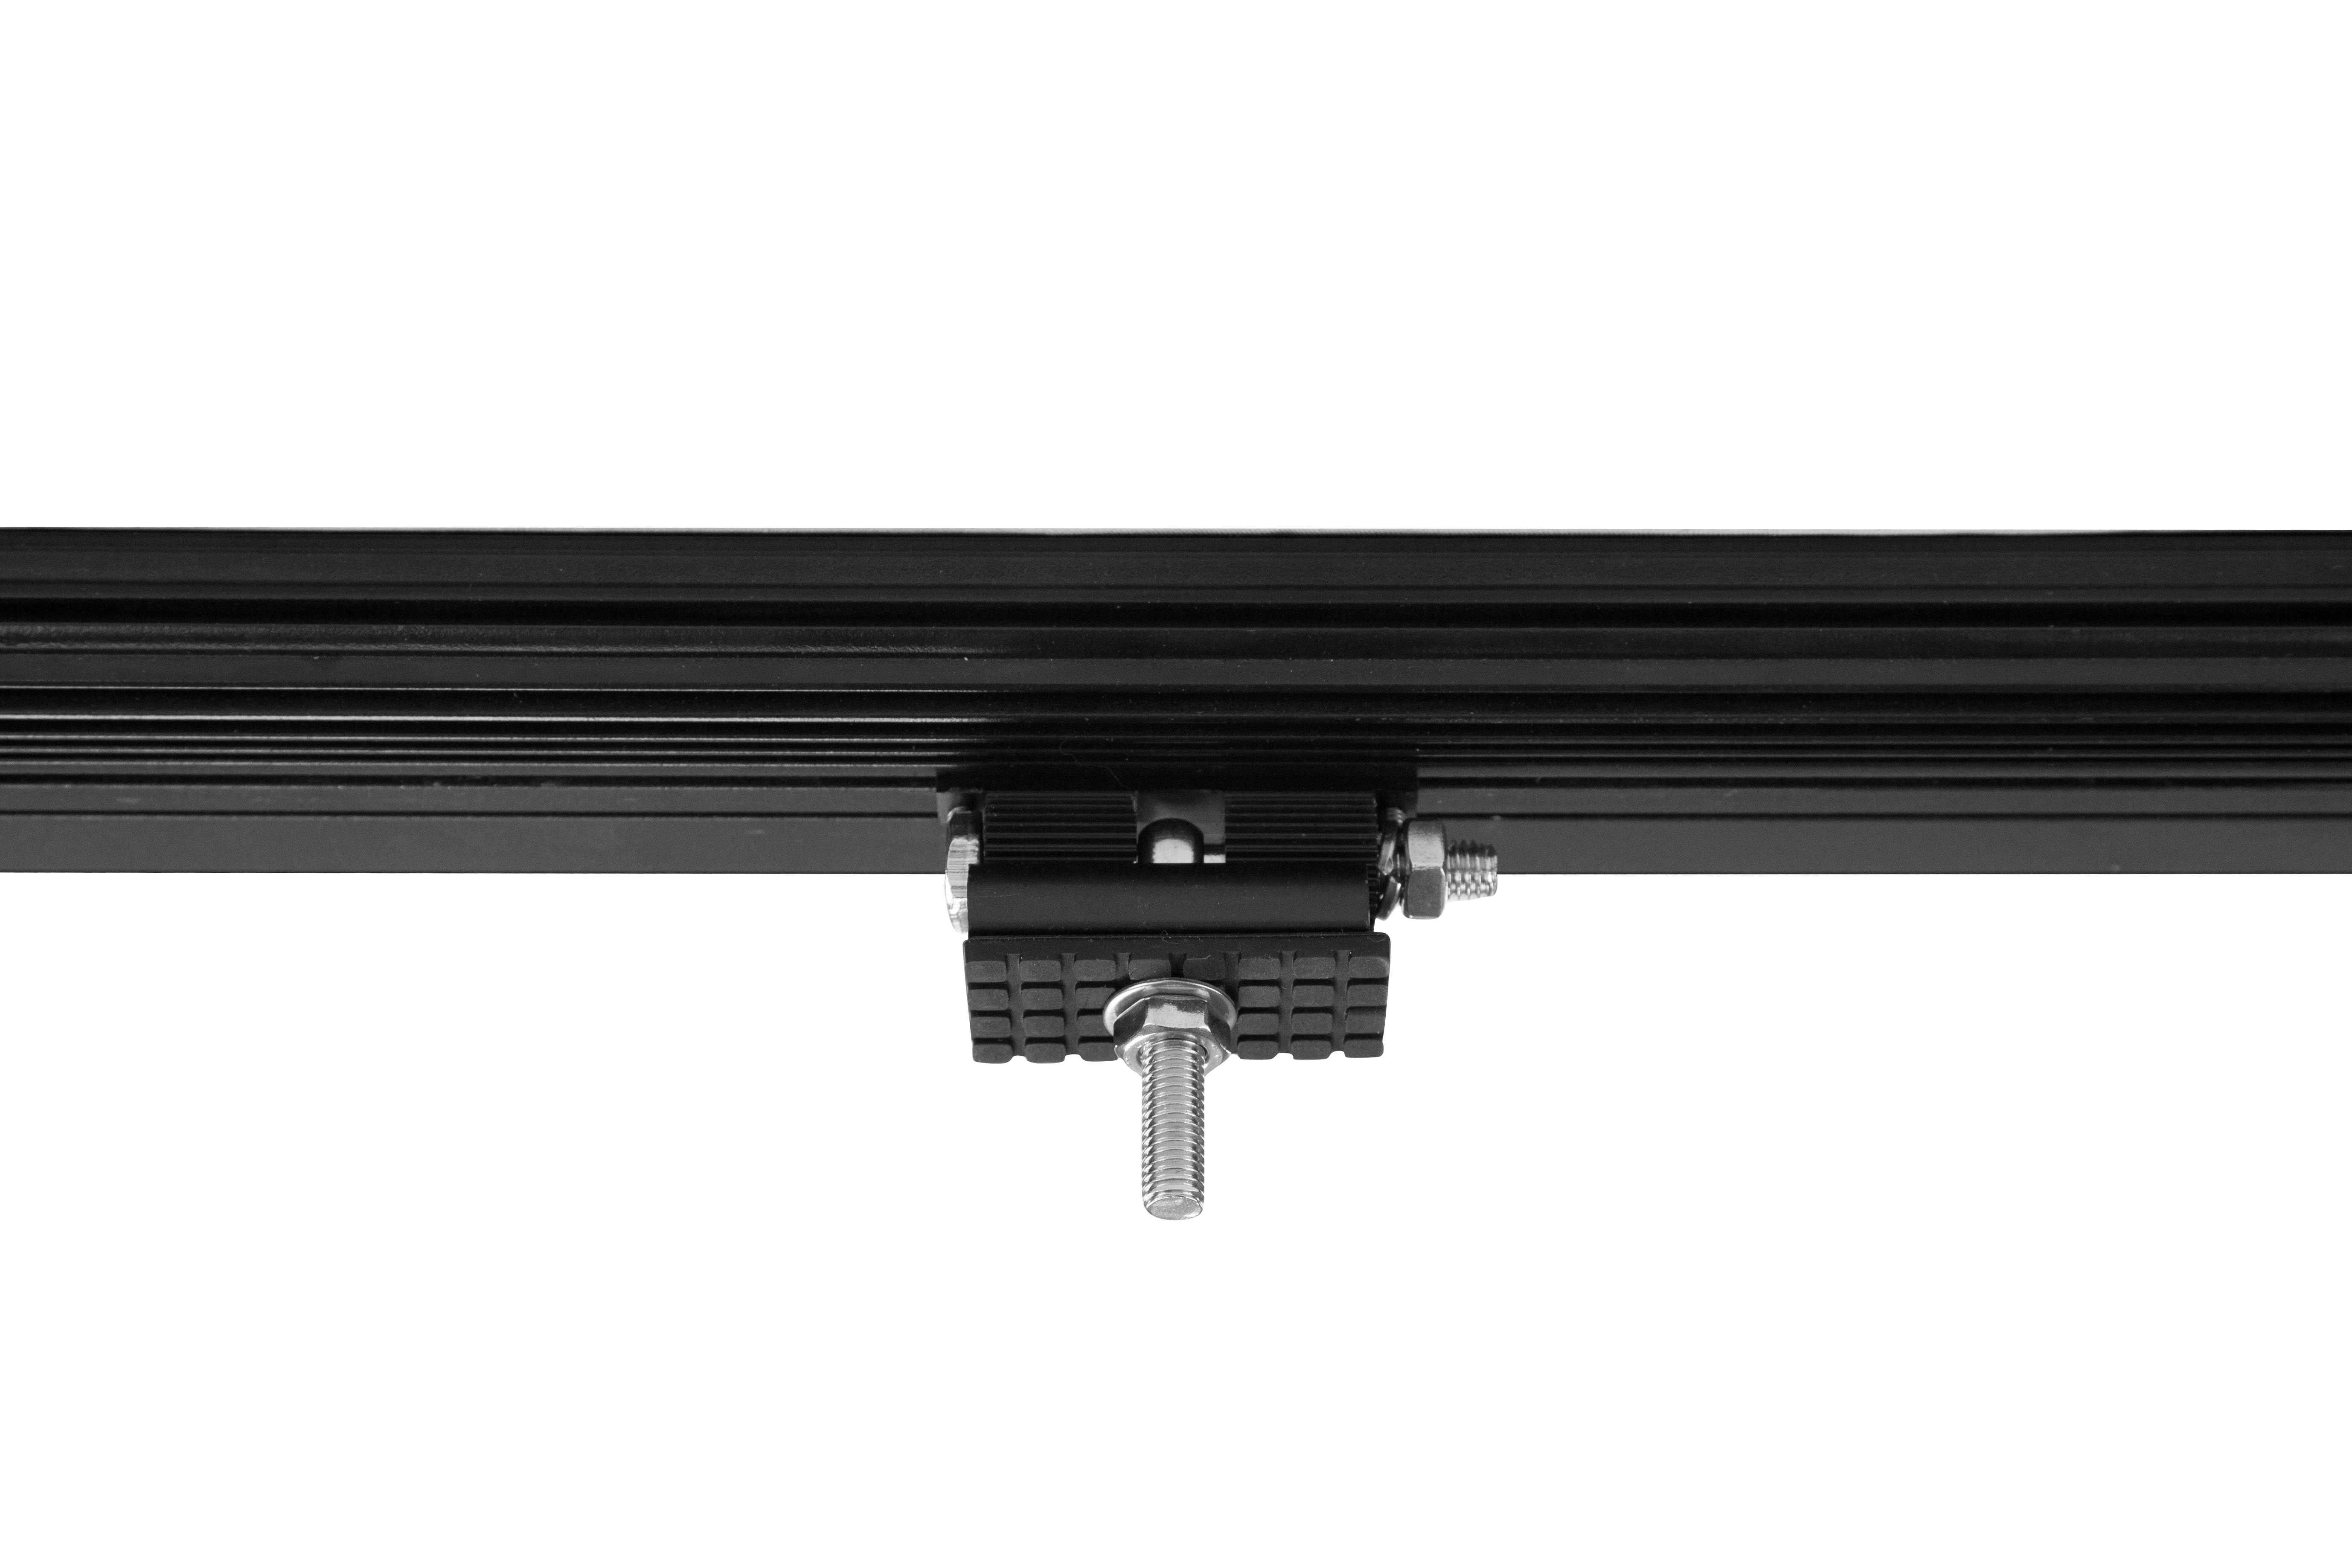 Adjustable Aluminum L-Brackets that Attach to Ends of Light Bars